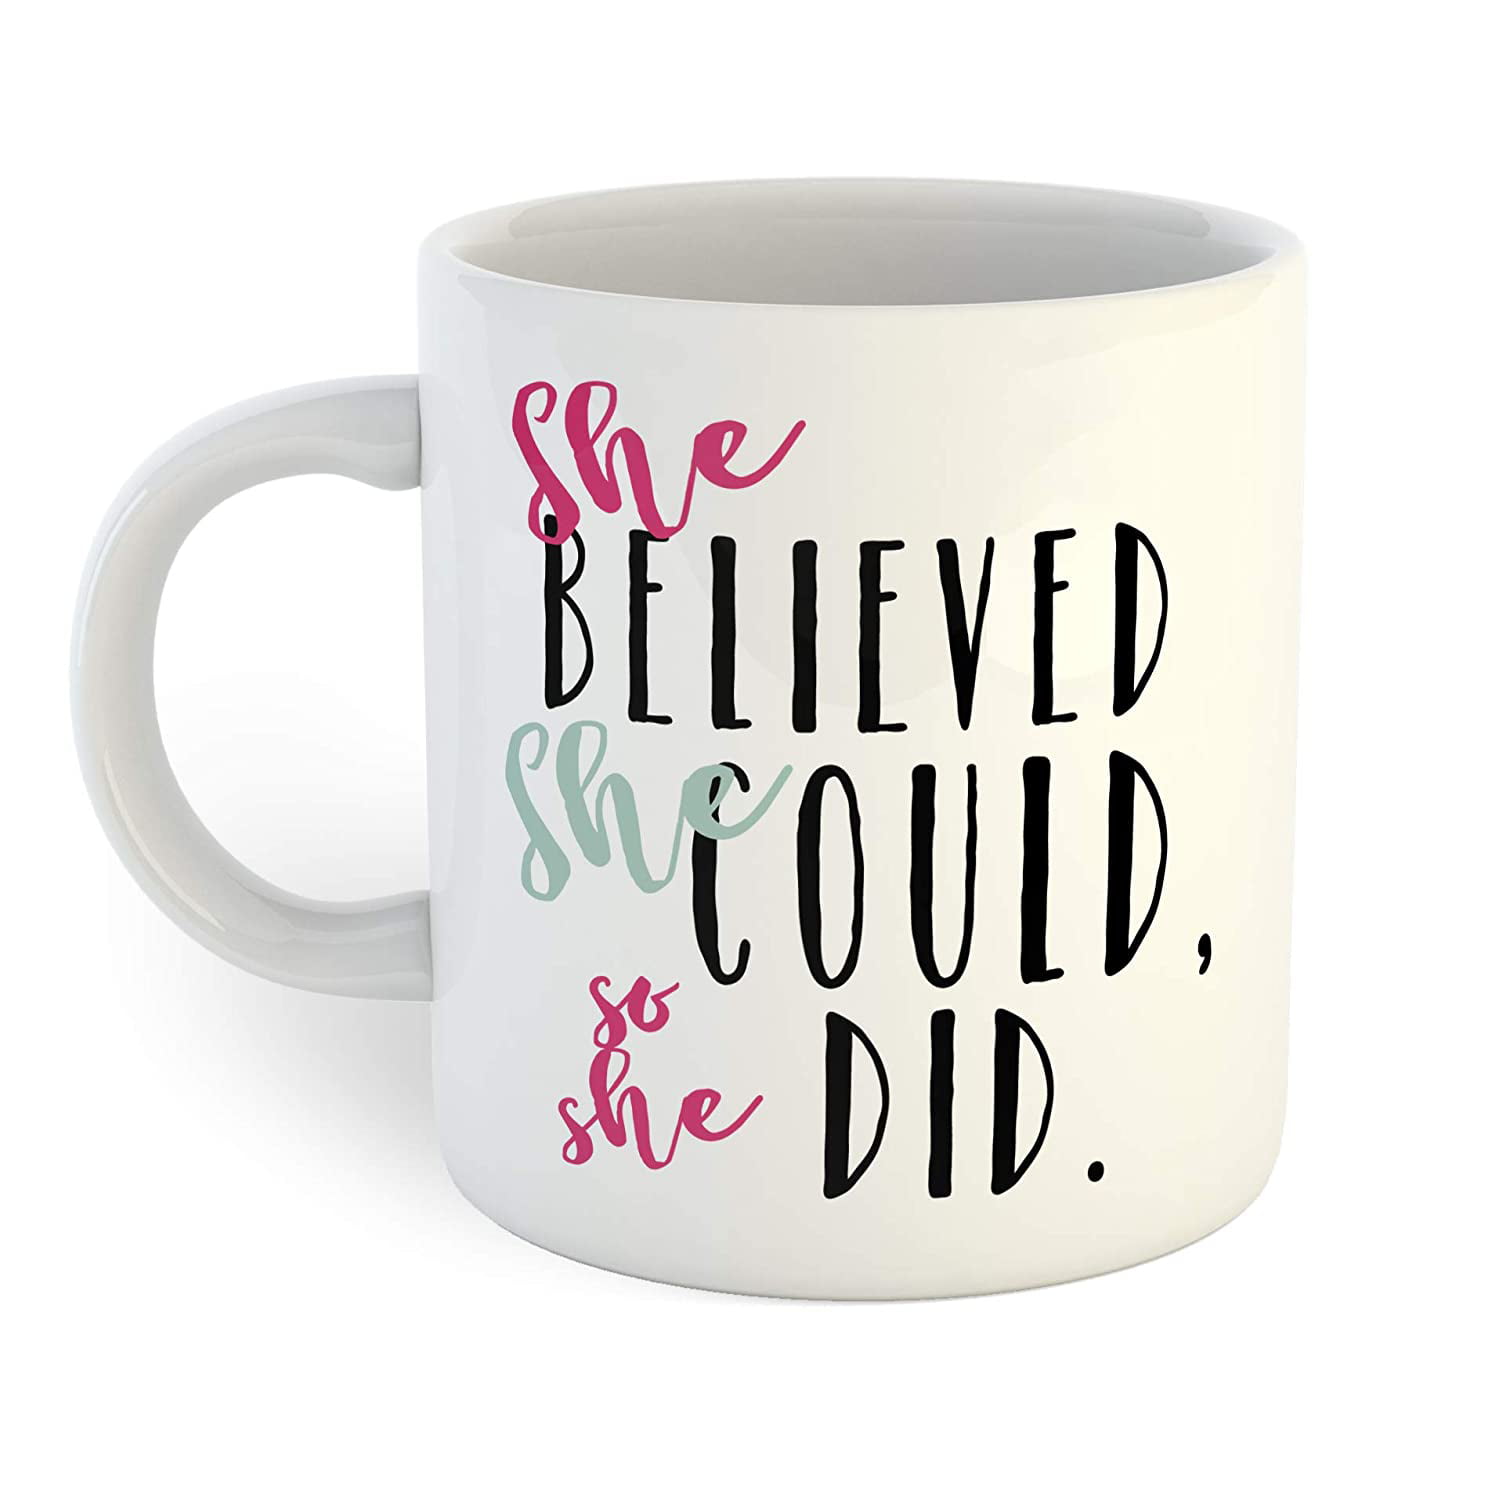 SHE BELIEVED SHE COULD SO SHE DID MUG CUPS COFFEE CHEERS PINK BLACK WHITE NEW 